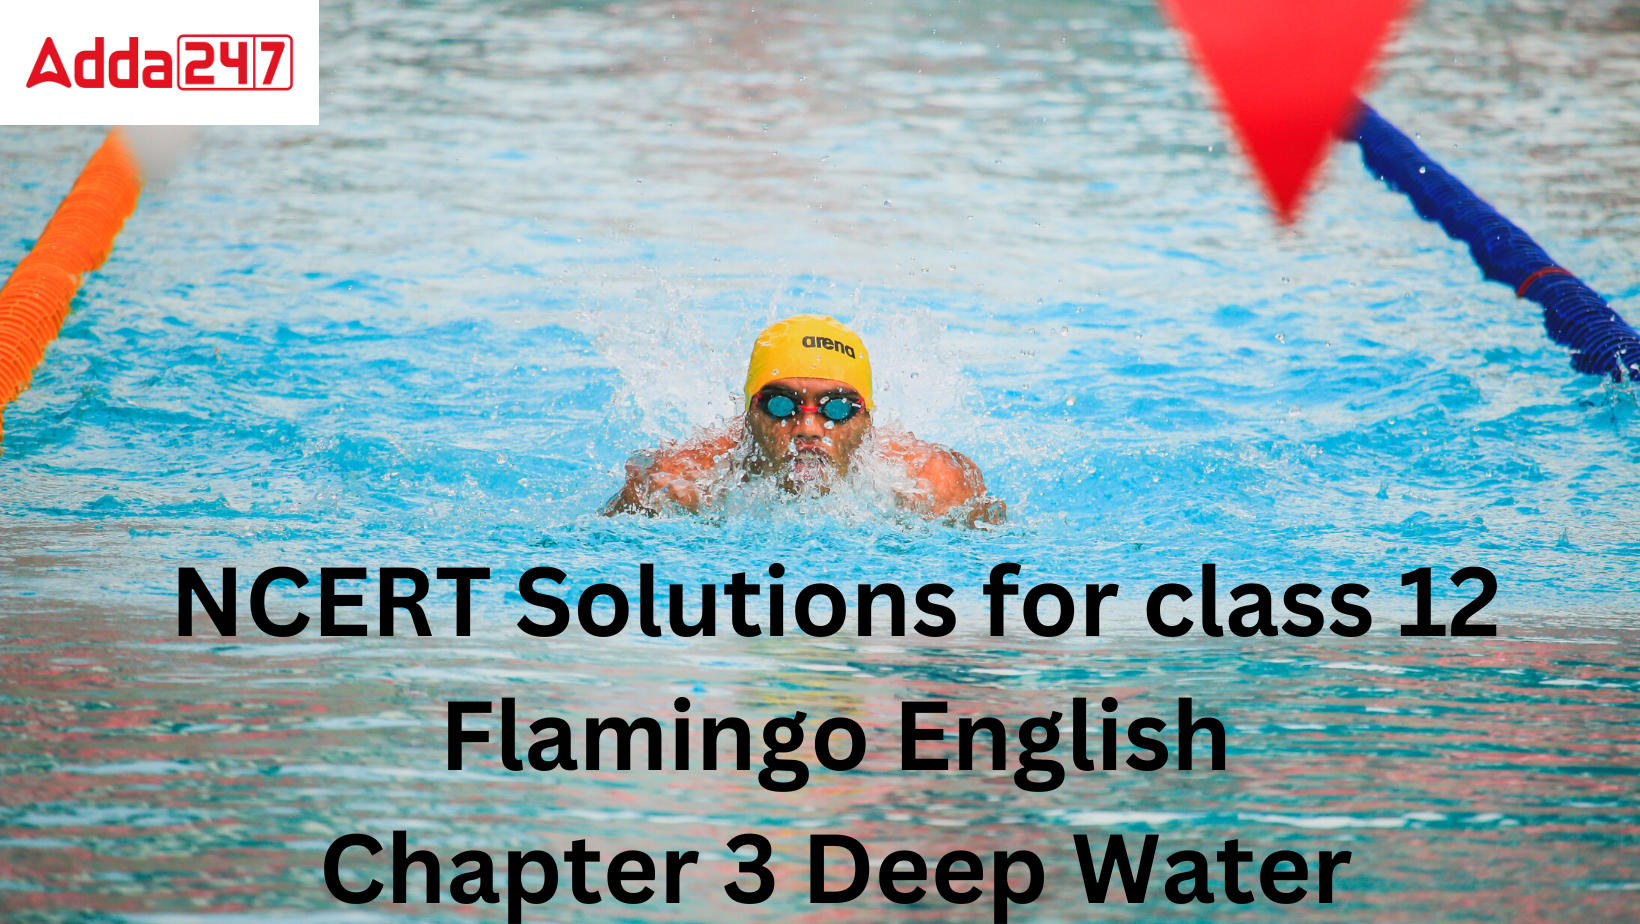 NCERT Solutions for class 12 Flamingo English Chapter 3 Deep Water